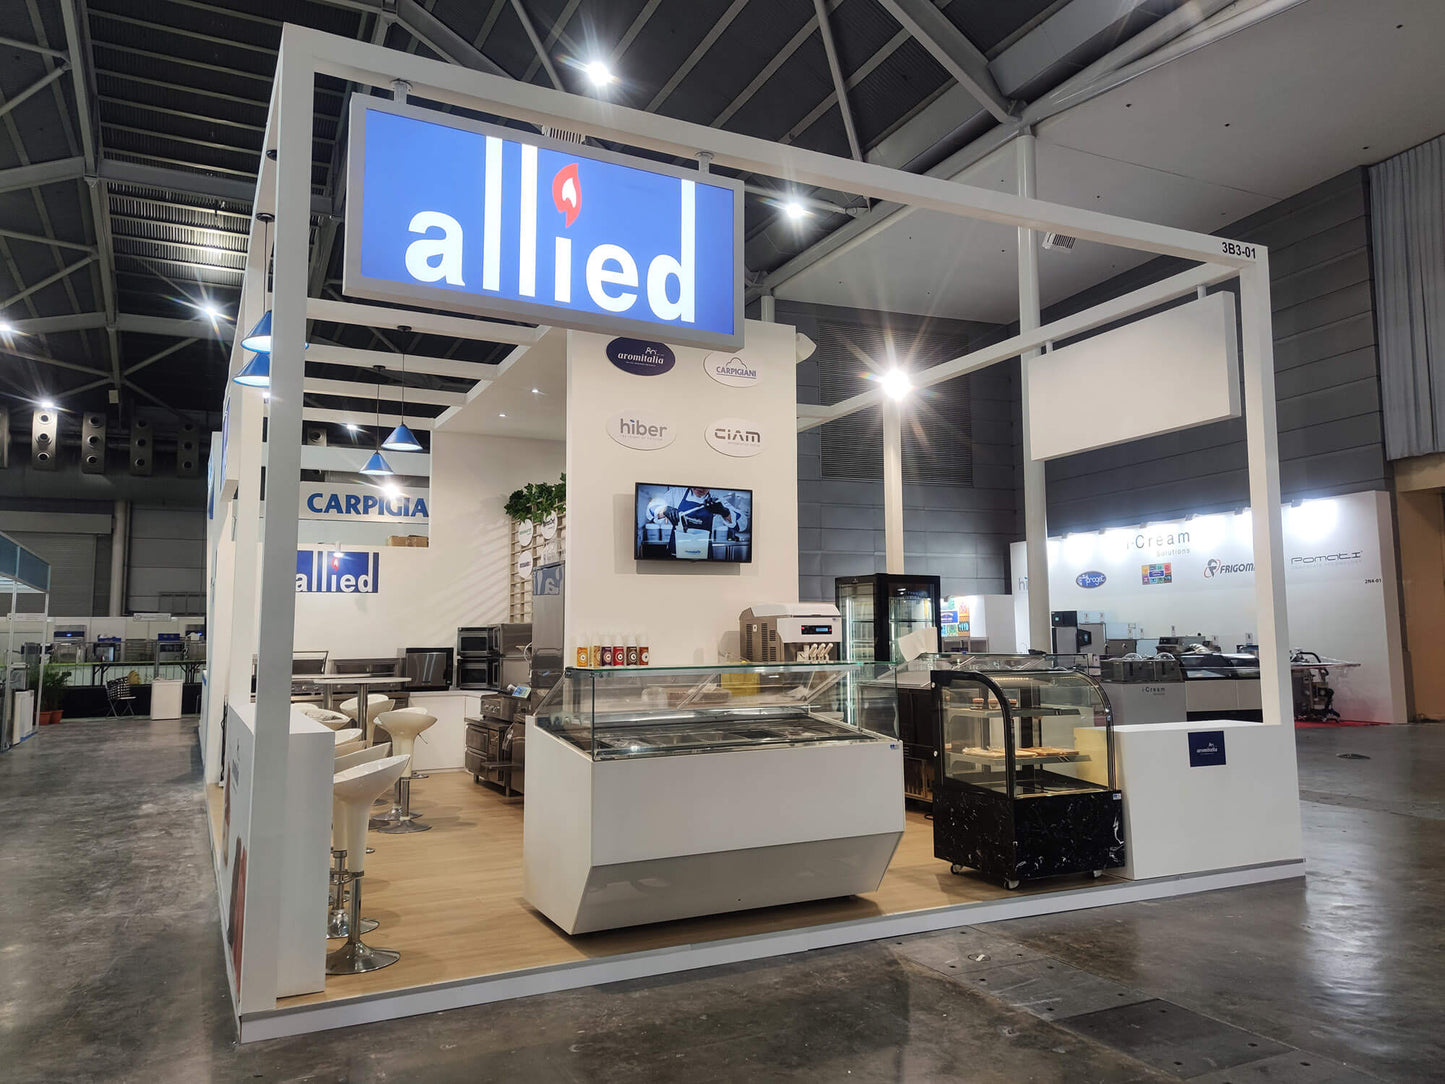 Exhibition Booth for Allied